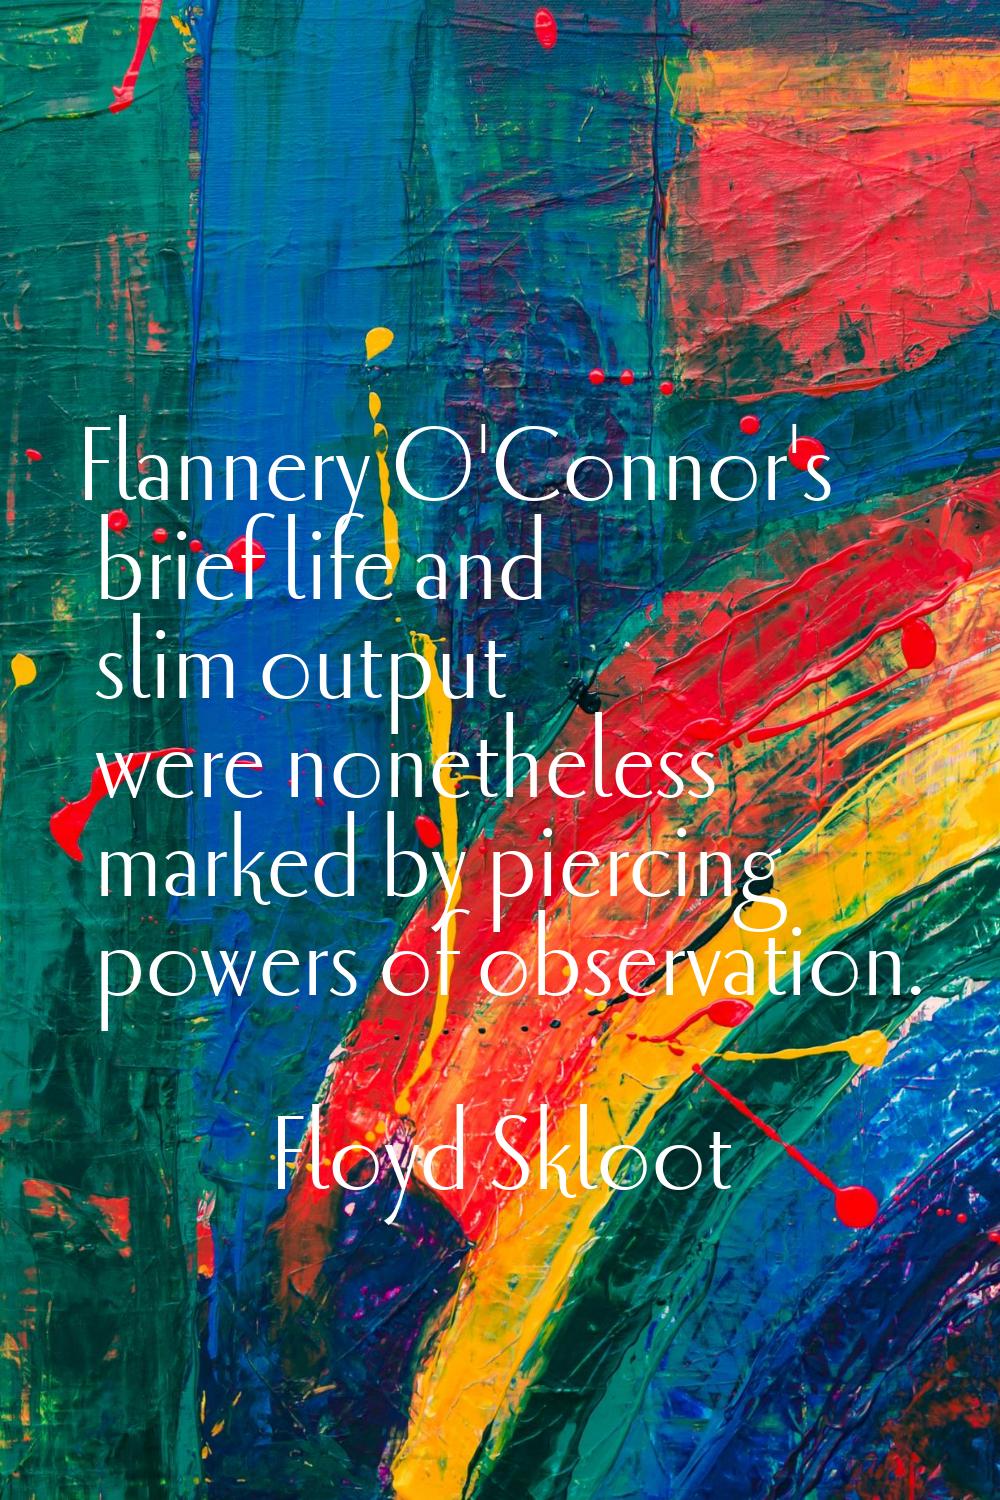 Flannery O'Connor's brief life and slim output were nonetheless marked by piercing powers of observ